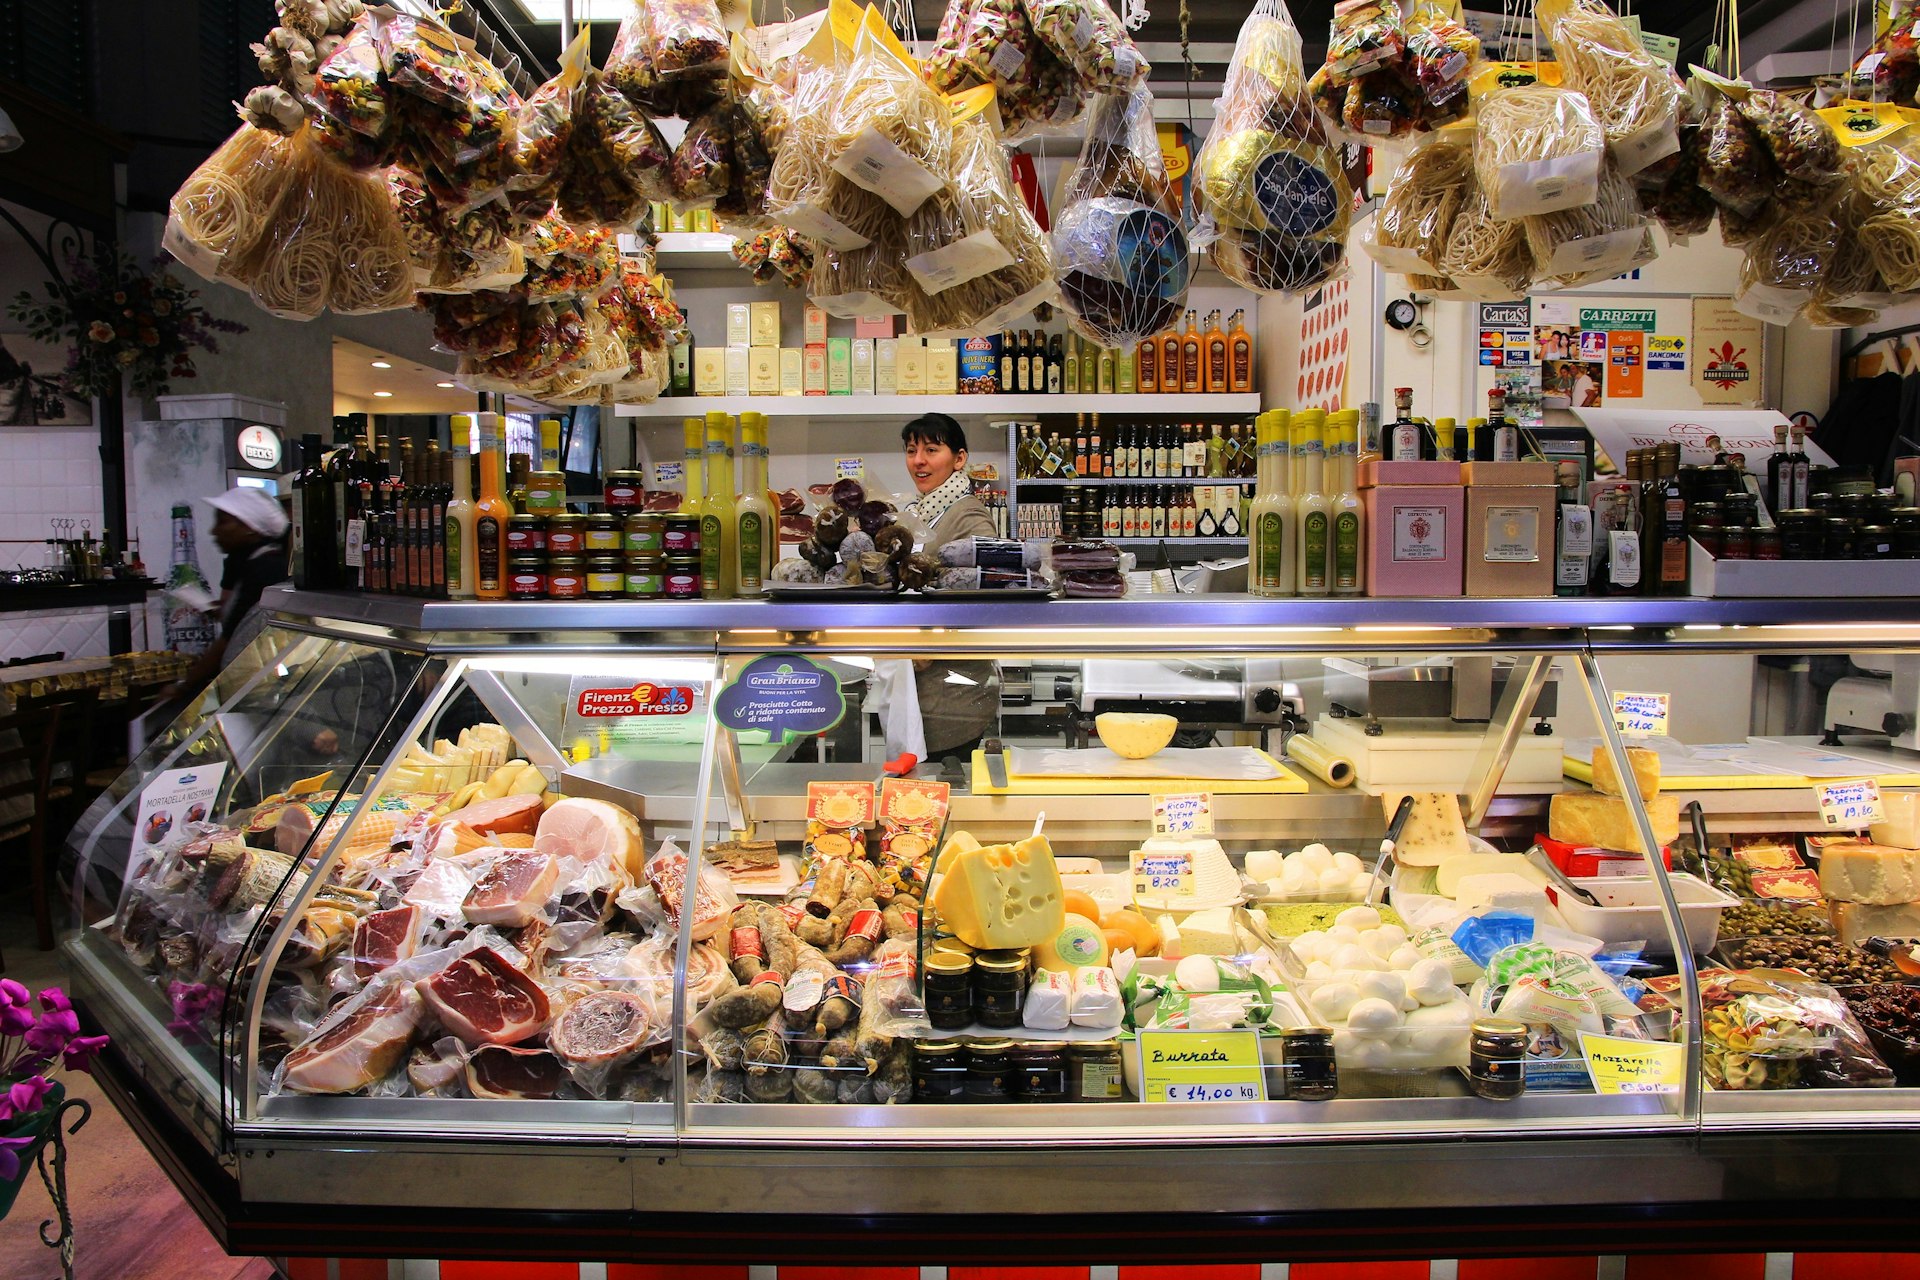 A vendor stands behind the refrigerated display counter of a stall selling cold meats, cheeses and dry goods in Florence's Mercato Centrale